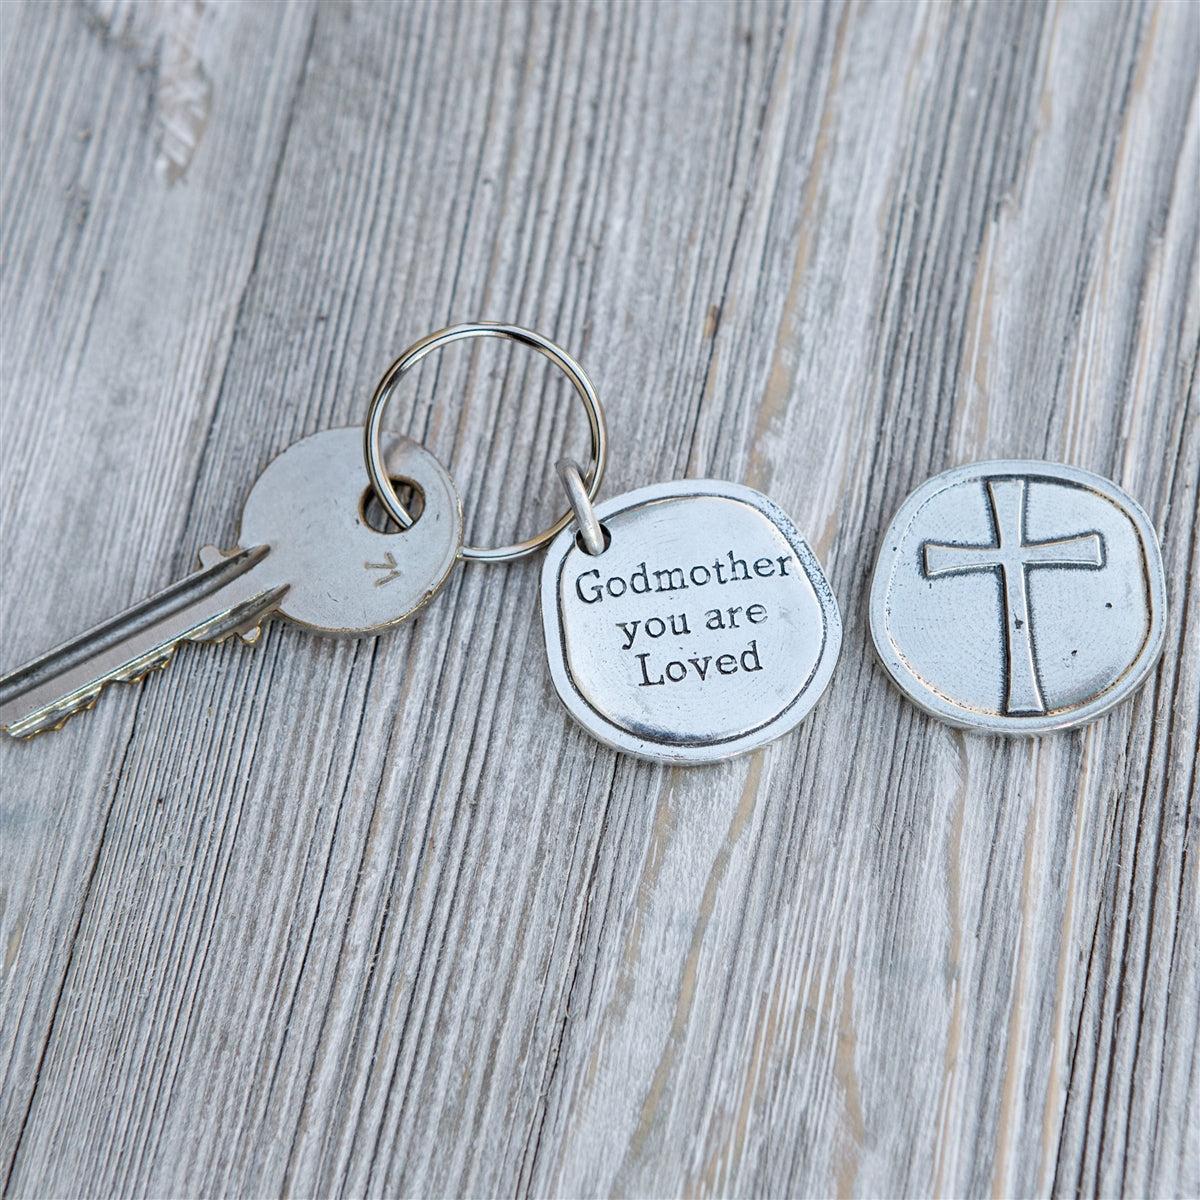 Godmother You are Loved Pewter Keychain and Card